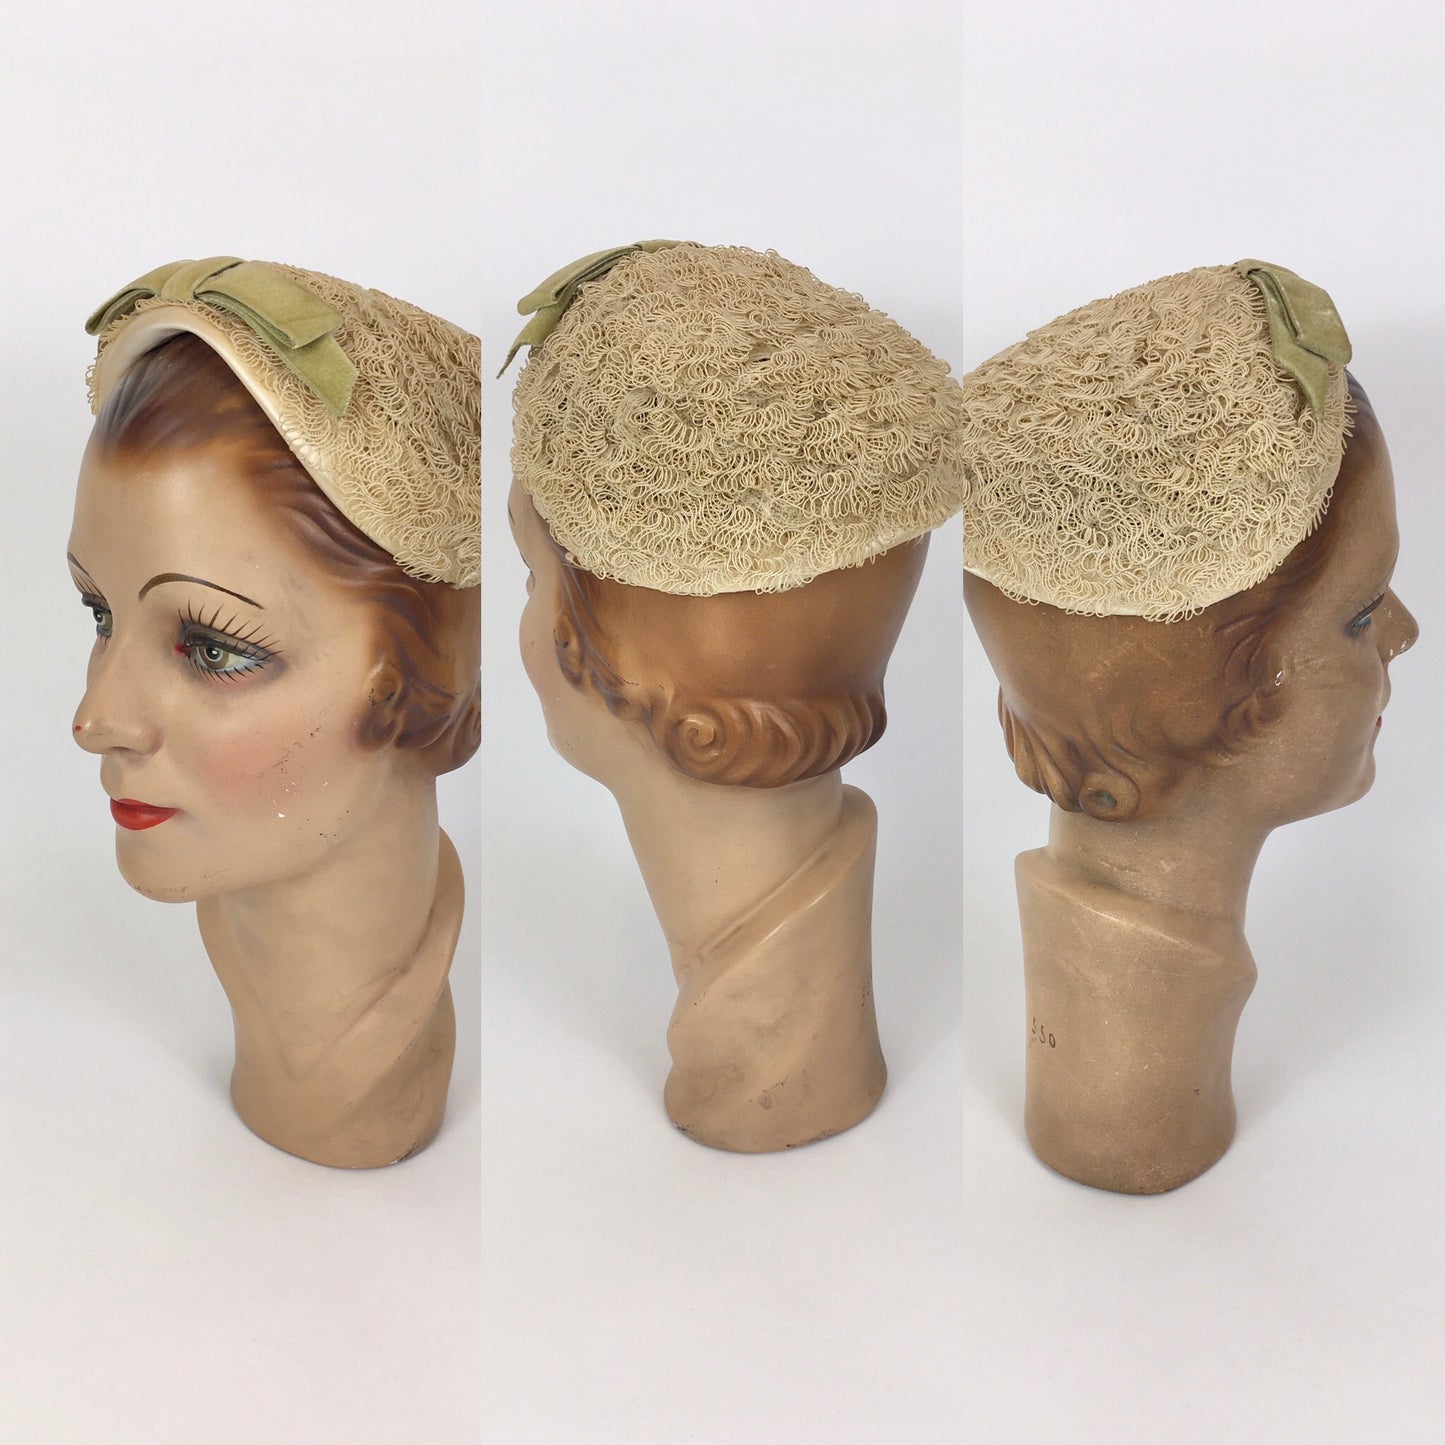 Original 1950’s Darling Headpiece - In A Soft Straw Colour with Contrast Rich Green Velvet Bow Detailing